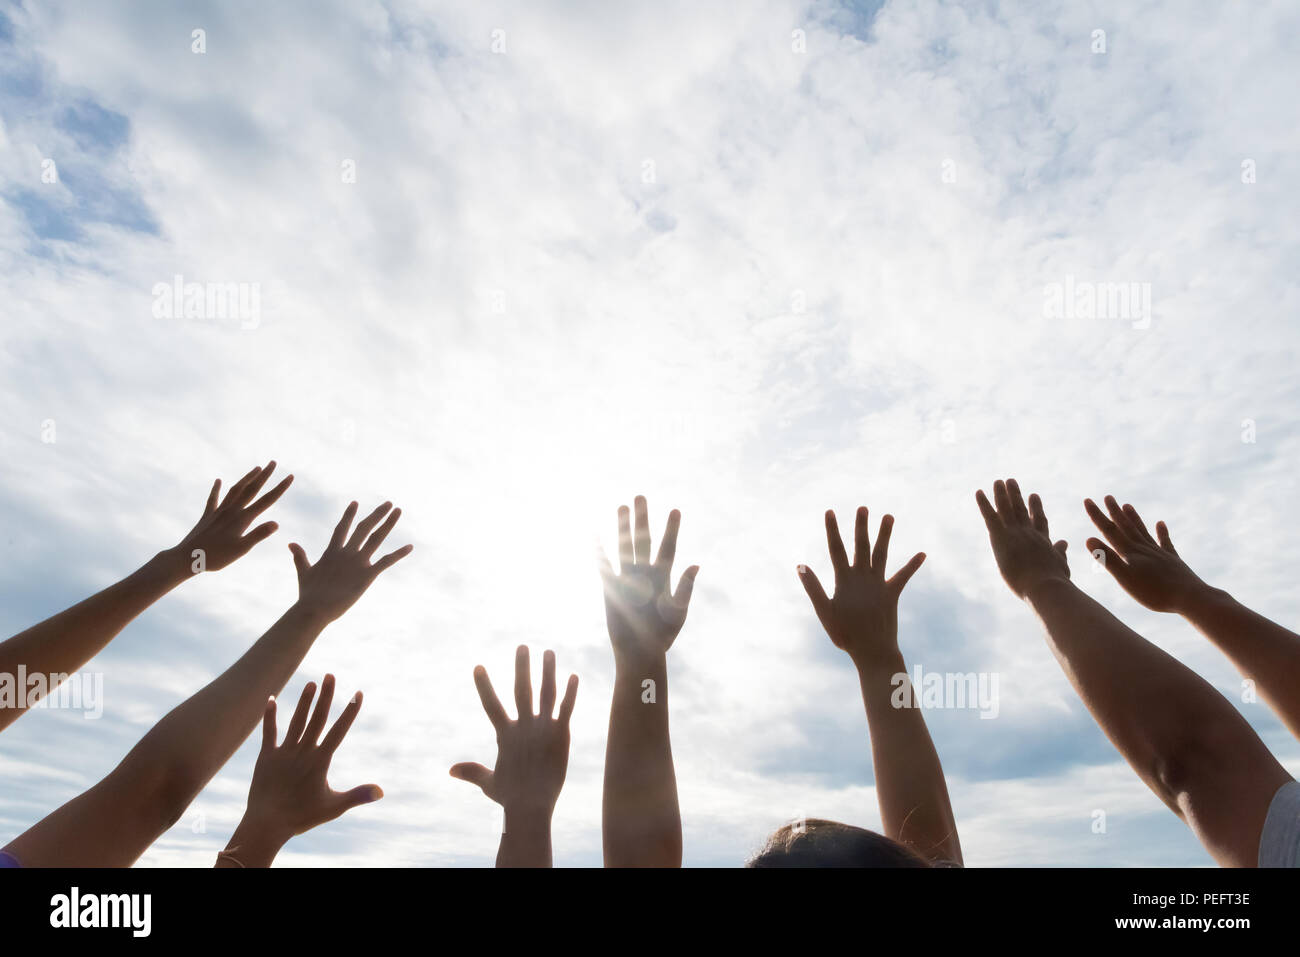 Many hands raised up against the blue sky. Friendship, Teamwork concept. Stock Photo